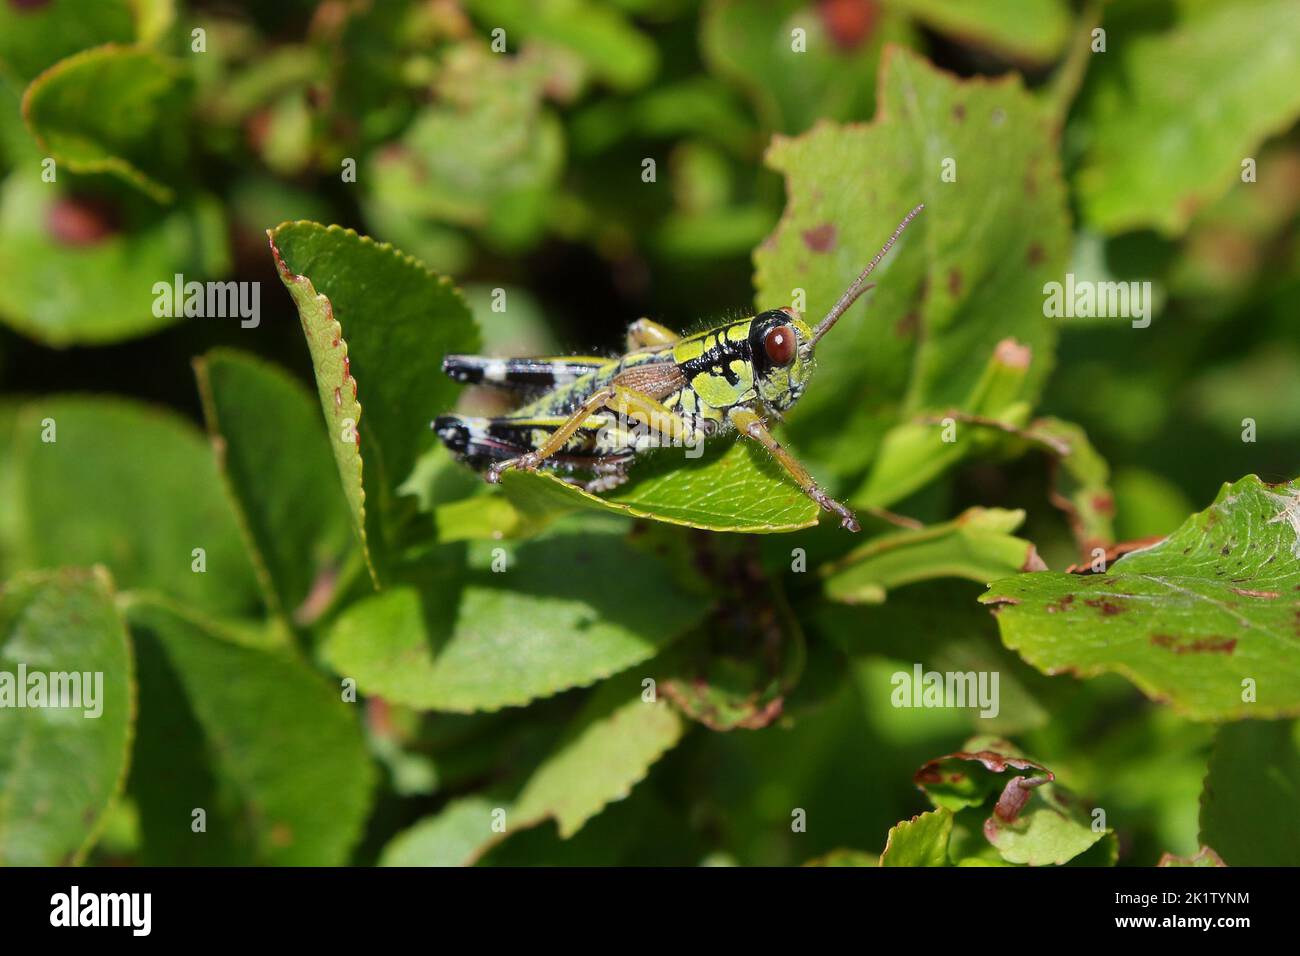 The Green Mountain Grasshopper (Miramella alpina) short-horned grasshopper in a natural habitat on the leaf of blueberry Stock Photo